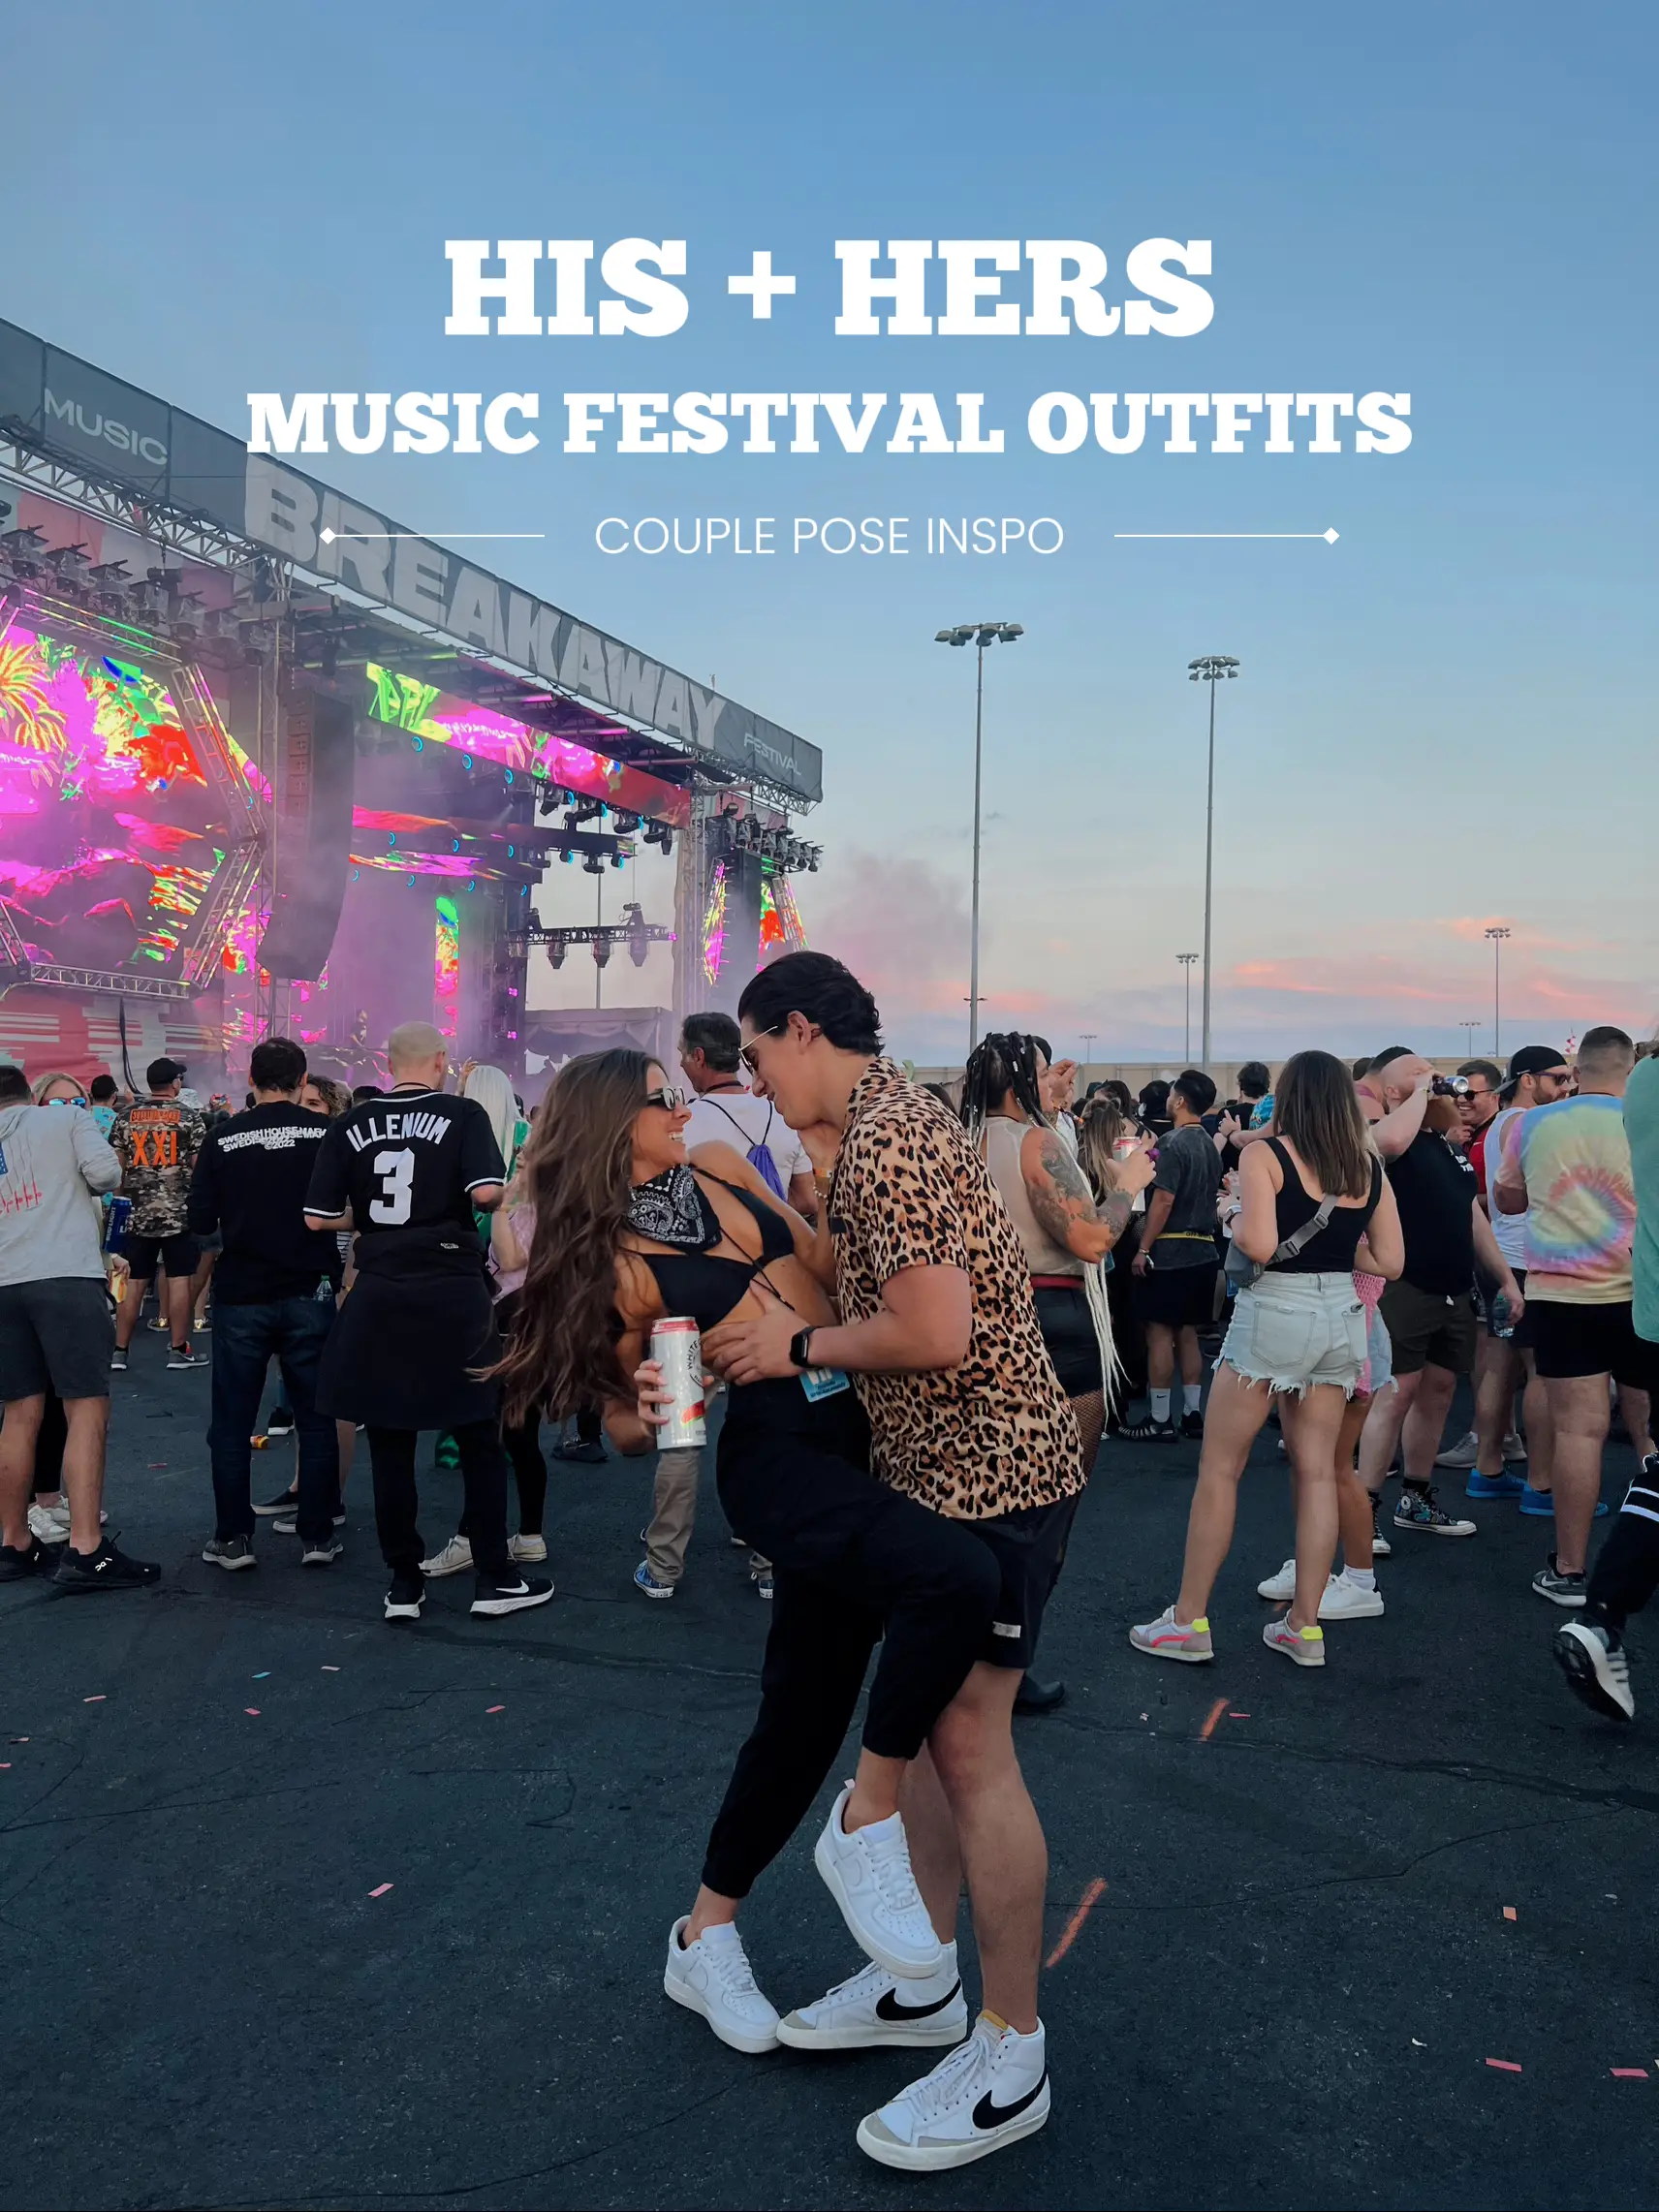 Couples that match festival outfits together, stay together❤️‍🔥 Outfits  available 08/29 at 12pmET!! #matchingraveoutfits #fes